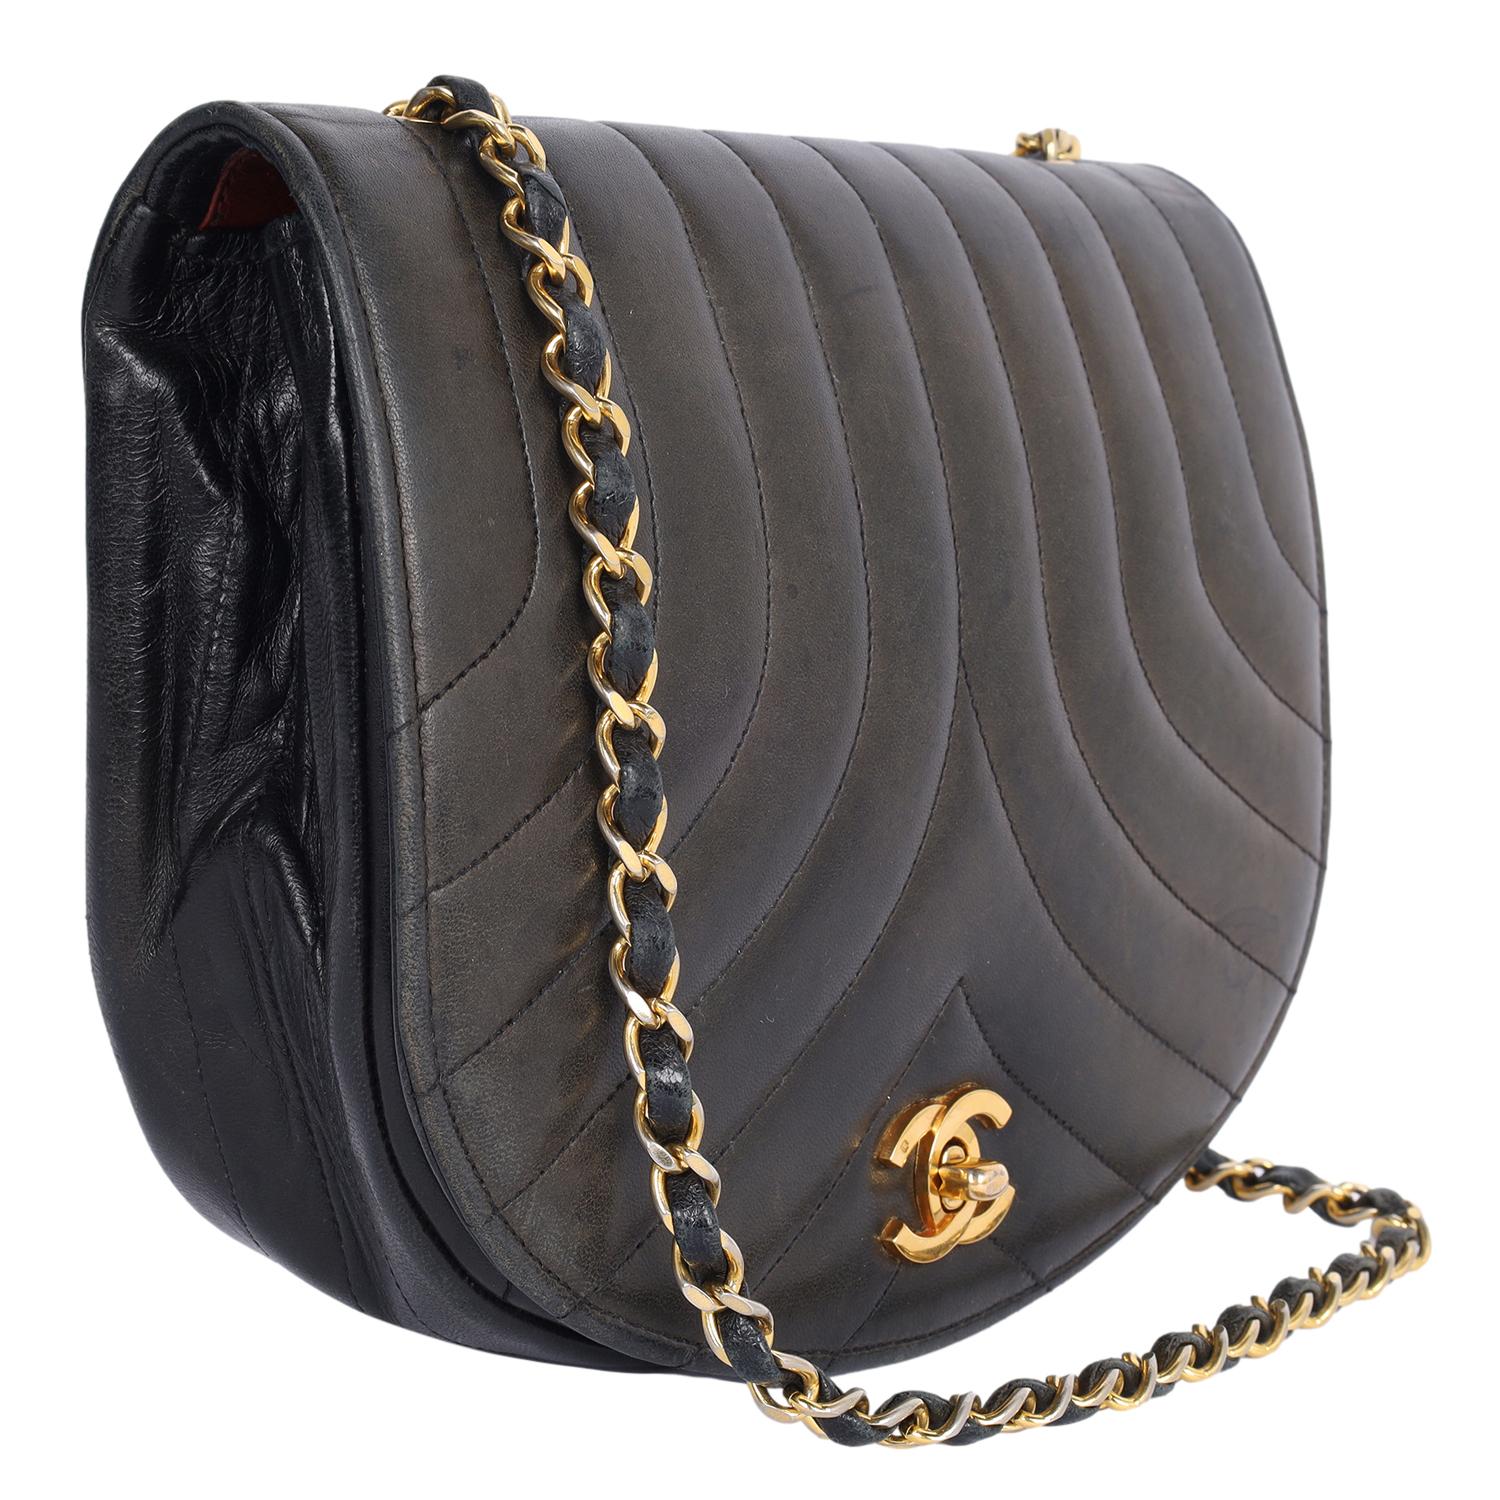 Chanel Black Classic Flap Quilted Leather Turn Lock Shoulder Bag In Fair Condition For Sale In Salt Lake Cty, UT